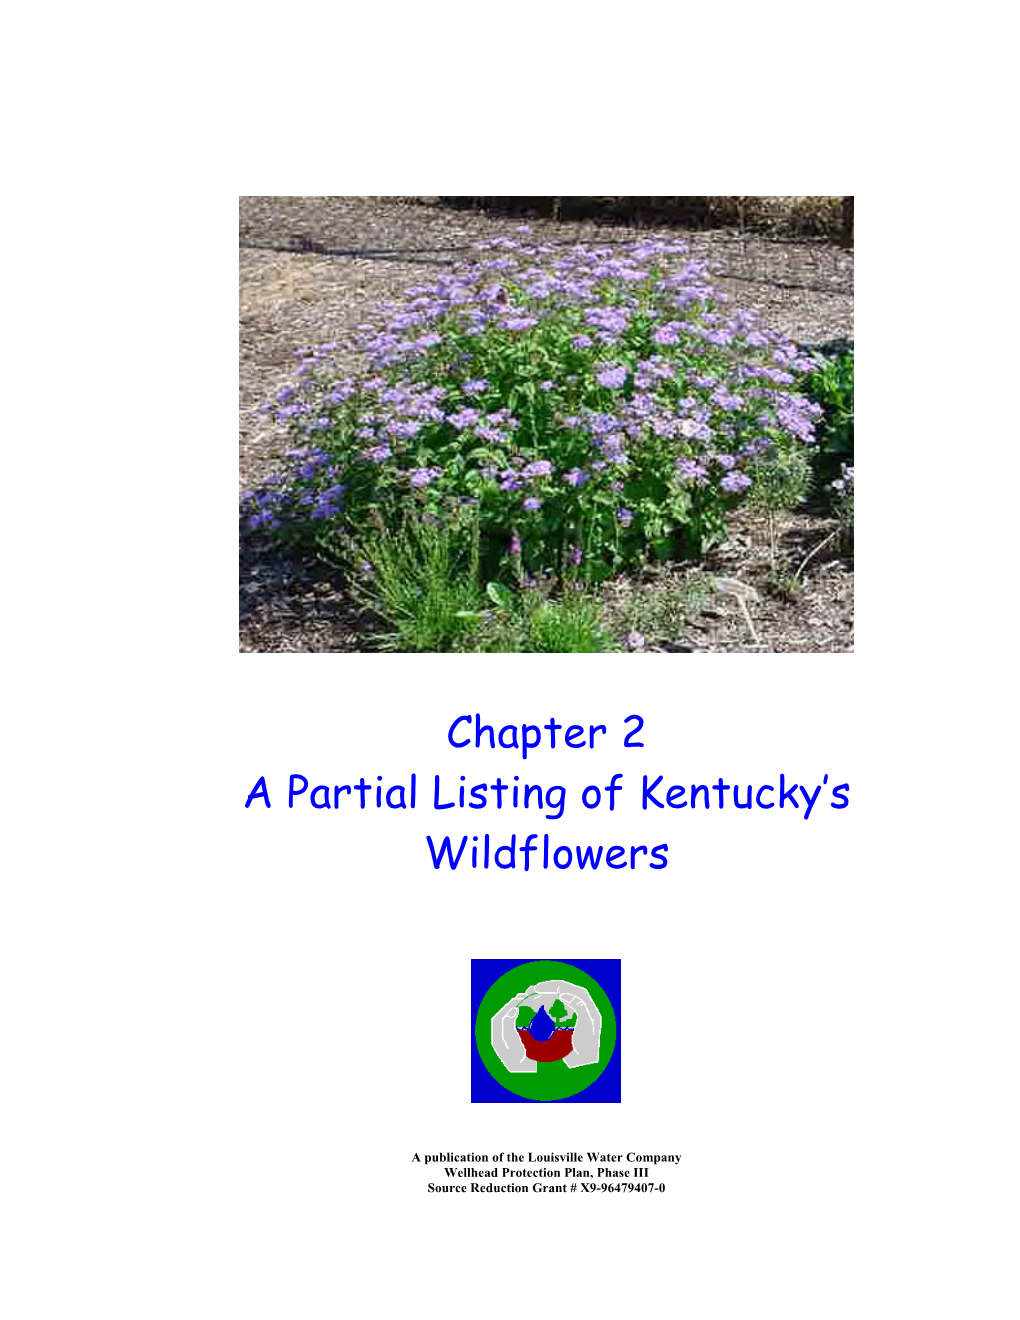 Chapter 2 a Partial Listing of Kentucky's Wildflowers